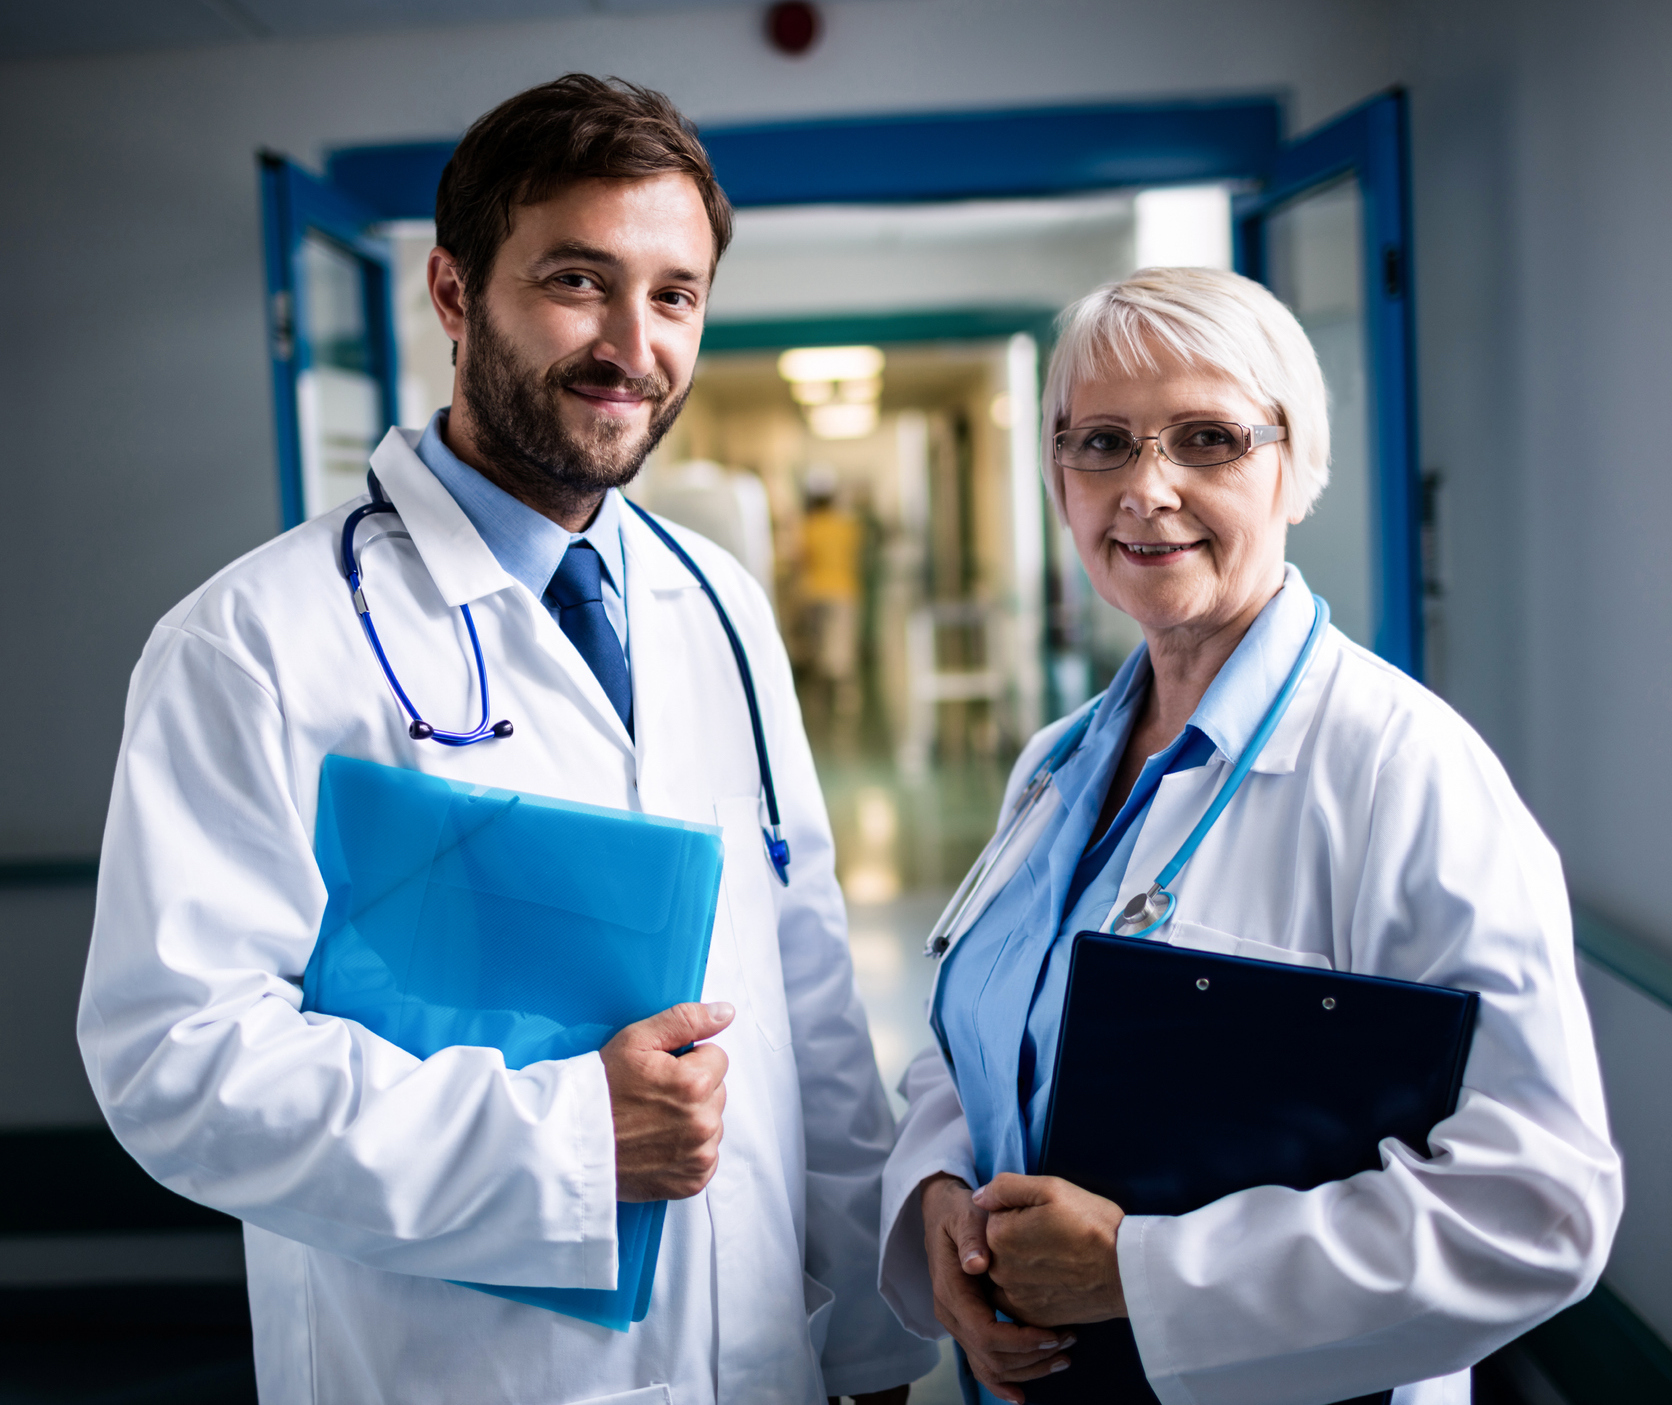 Doctors standing together with clipboard and file